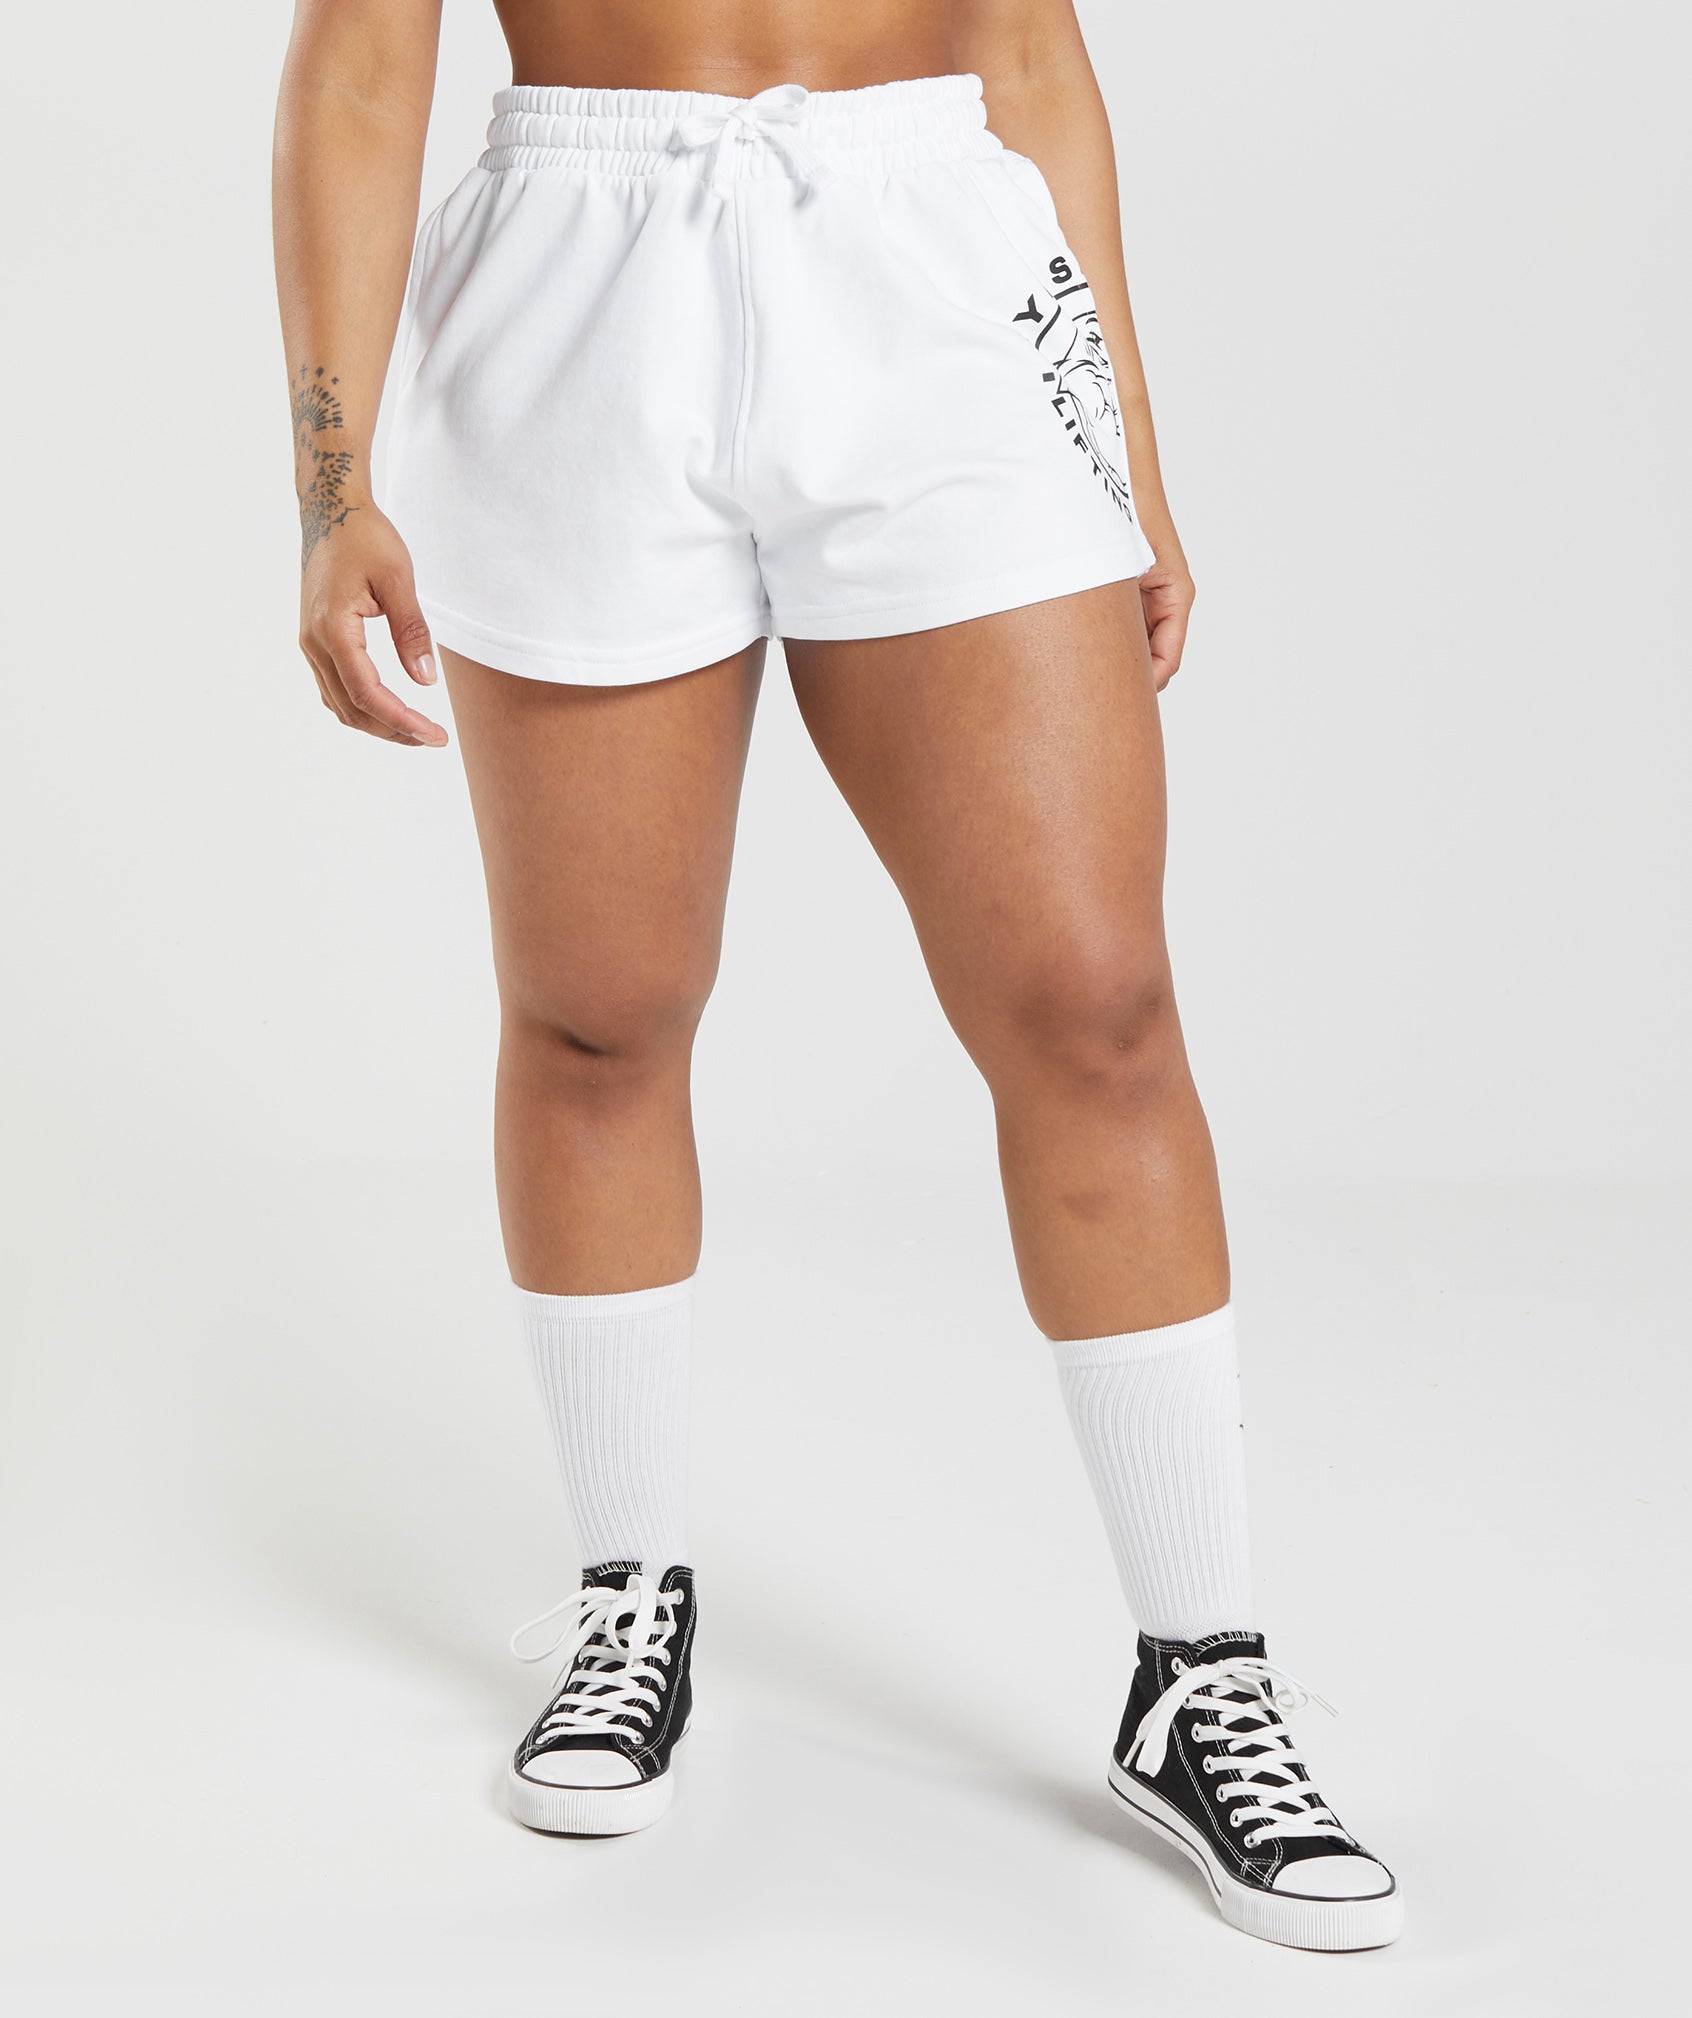 Legacy Shorts in White - view 1